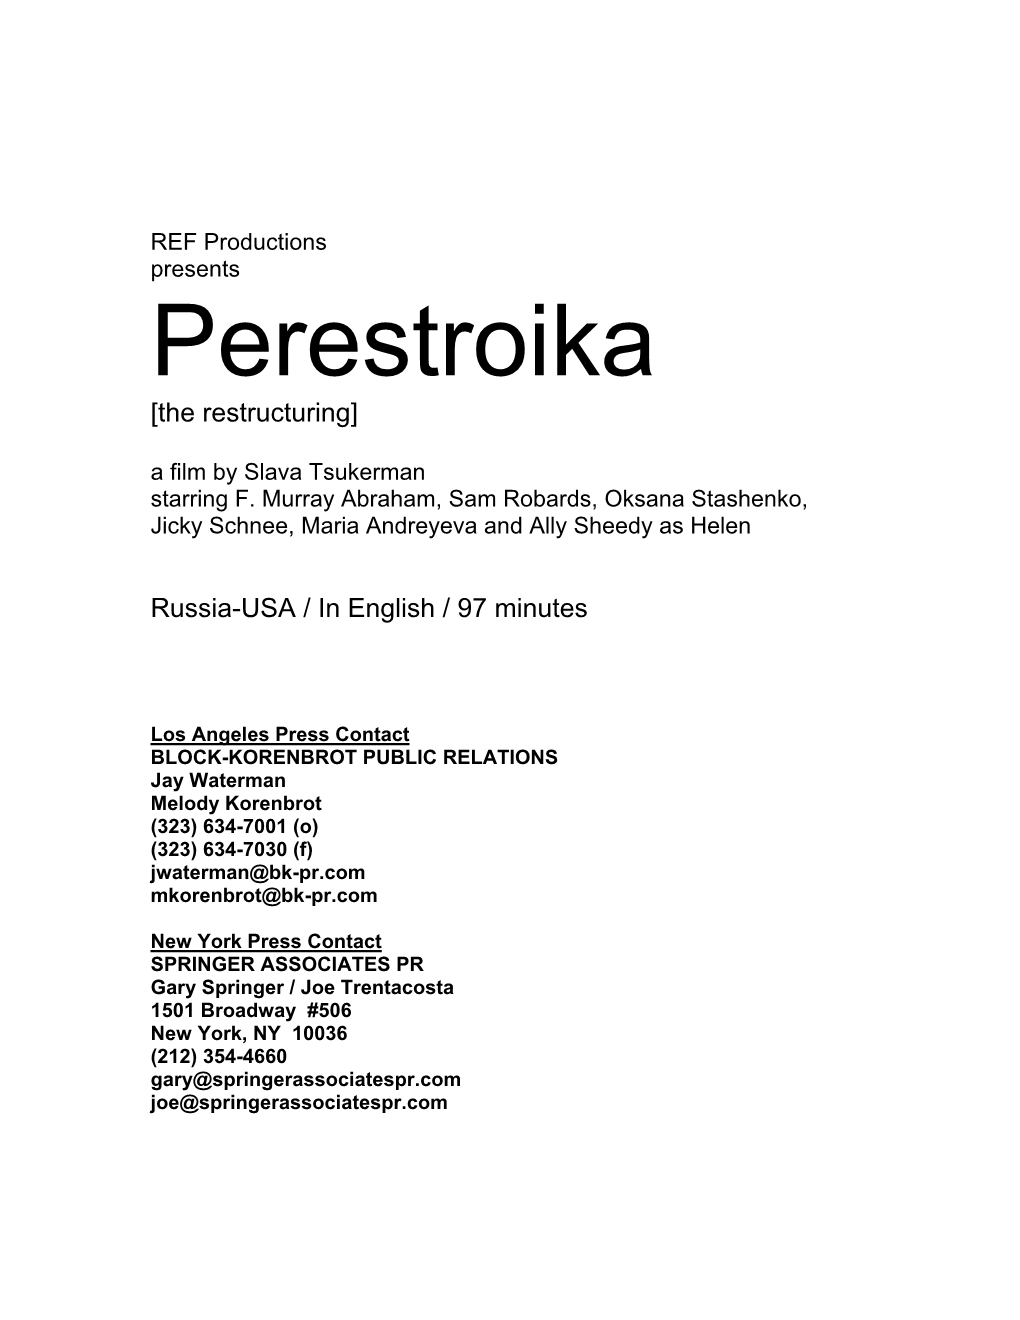 REF Productions Presents Perestroika [The Restructuring] a Film by Slava Tsukerman Starring F